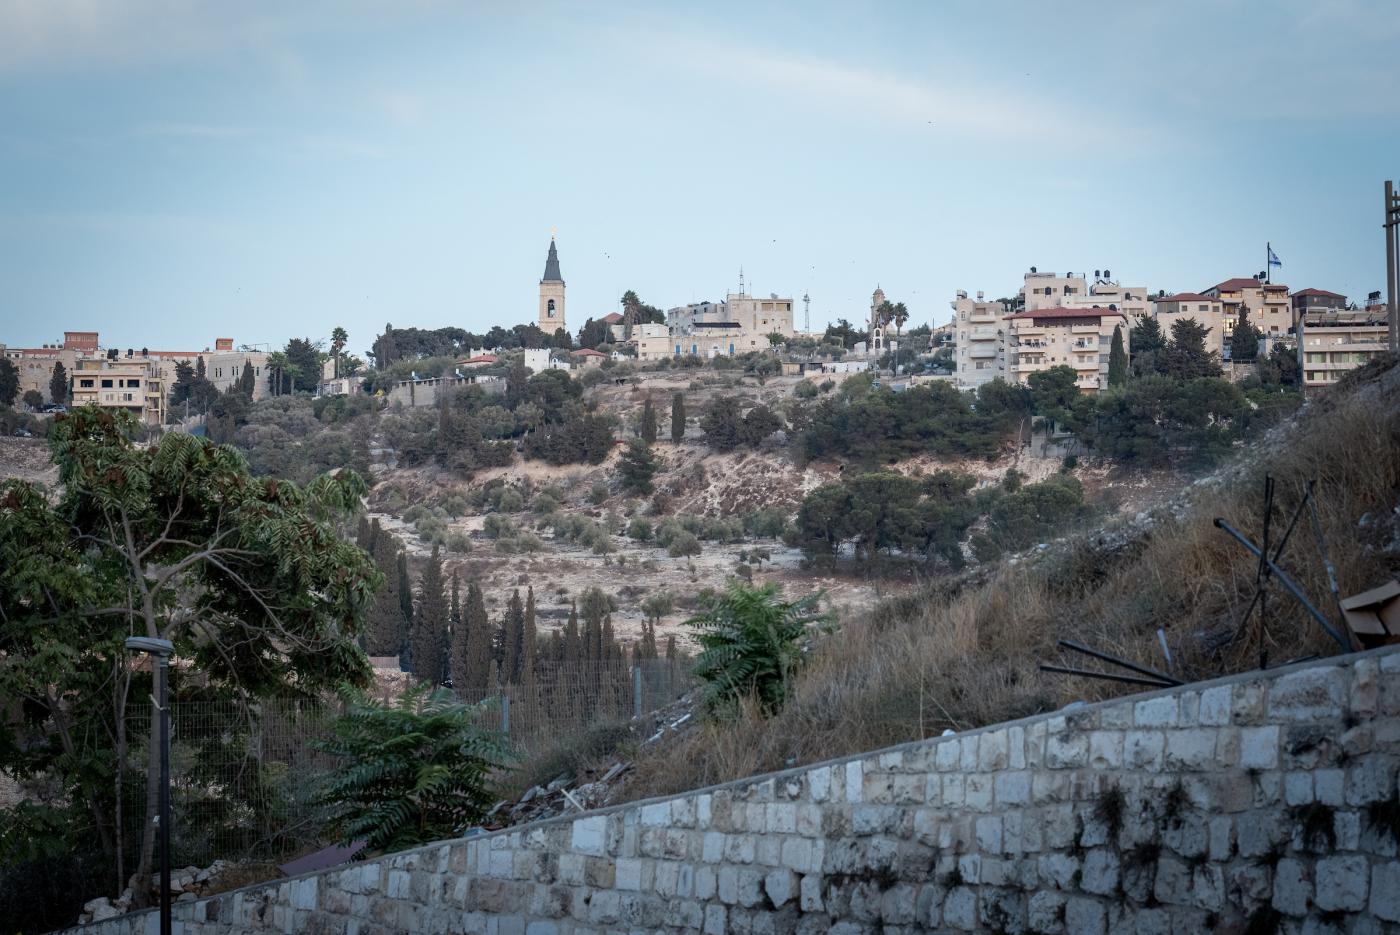 Scenery of church and buildings in Jerusalem 